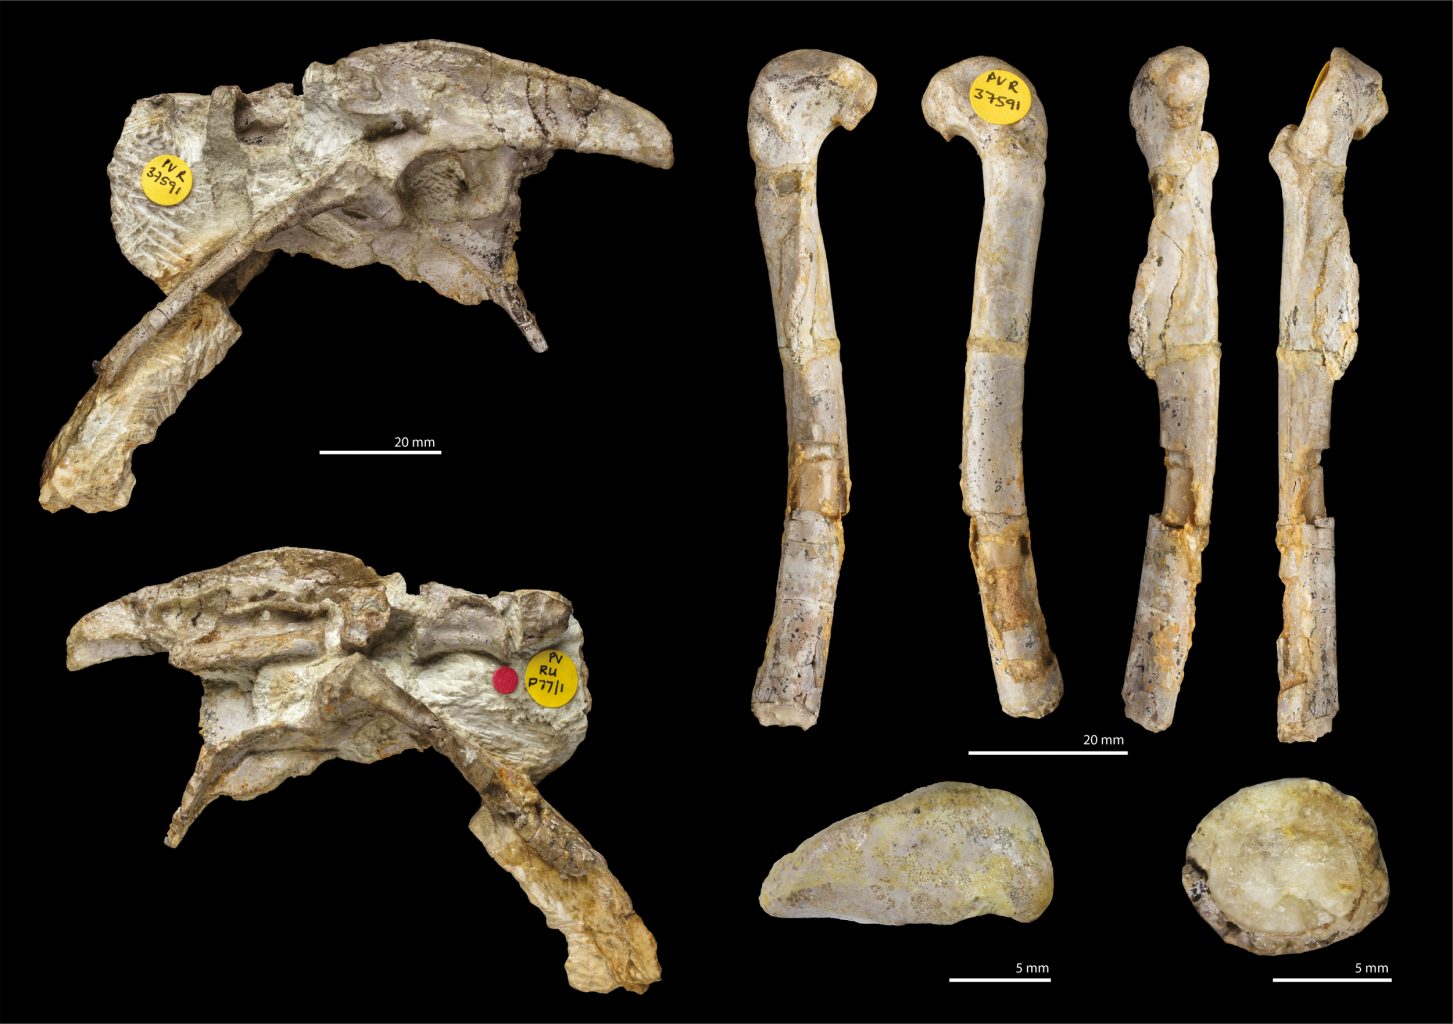 Fossil remains of the "dragon" dinosaur that were mistaken for another species for decades. Credit: Spiekman et al. / Royal Society Open Science, 2021